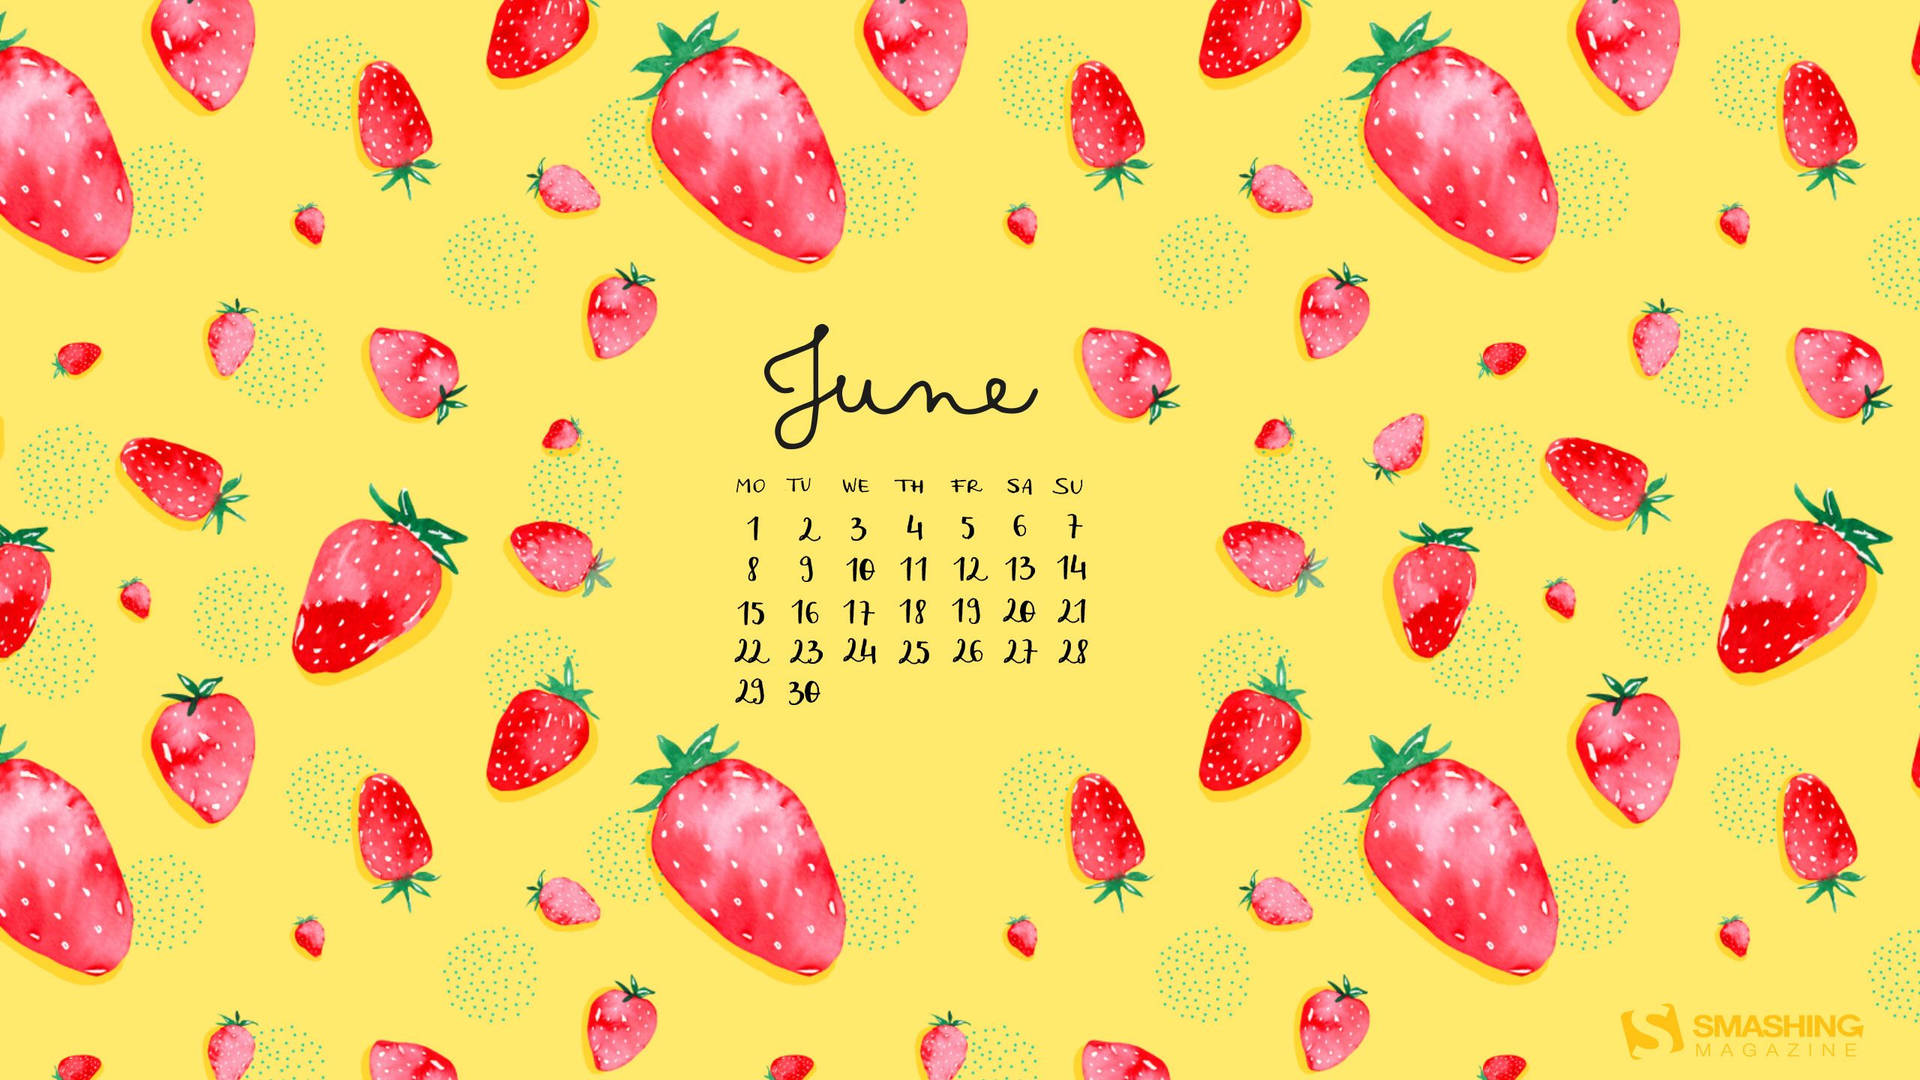 Celebrate The Month Of June With Tasty Strawberries. Background